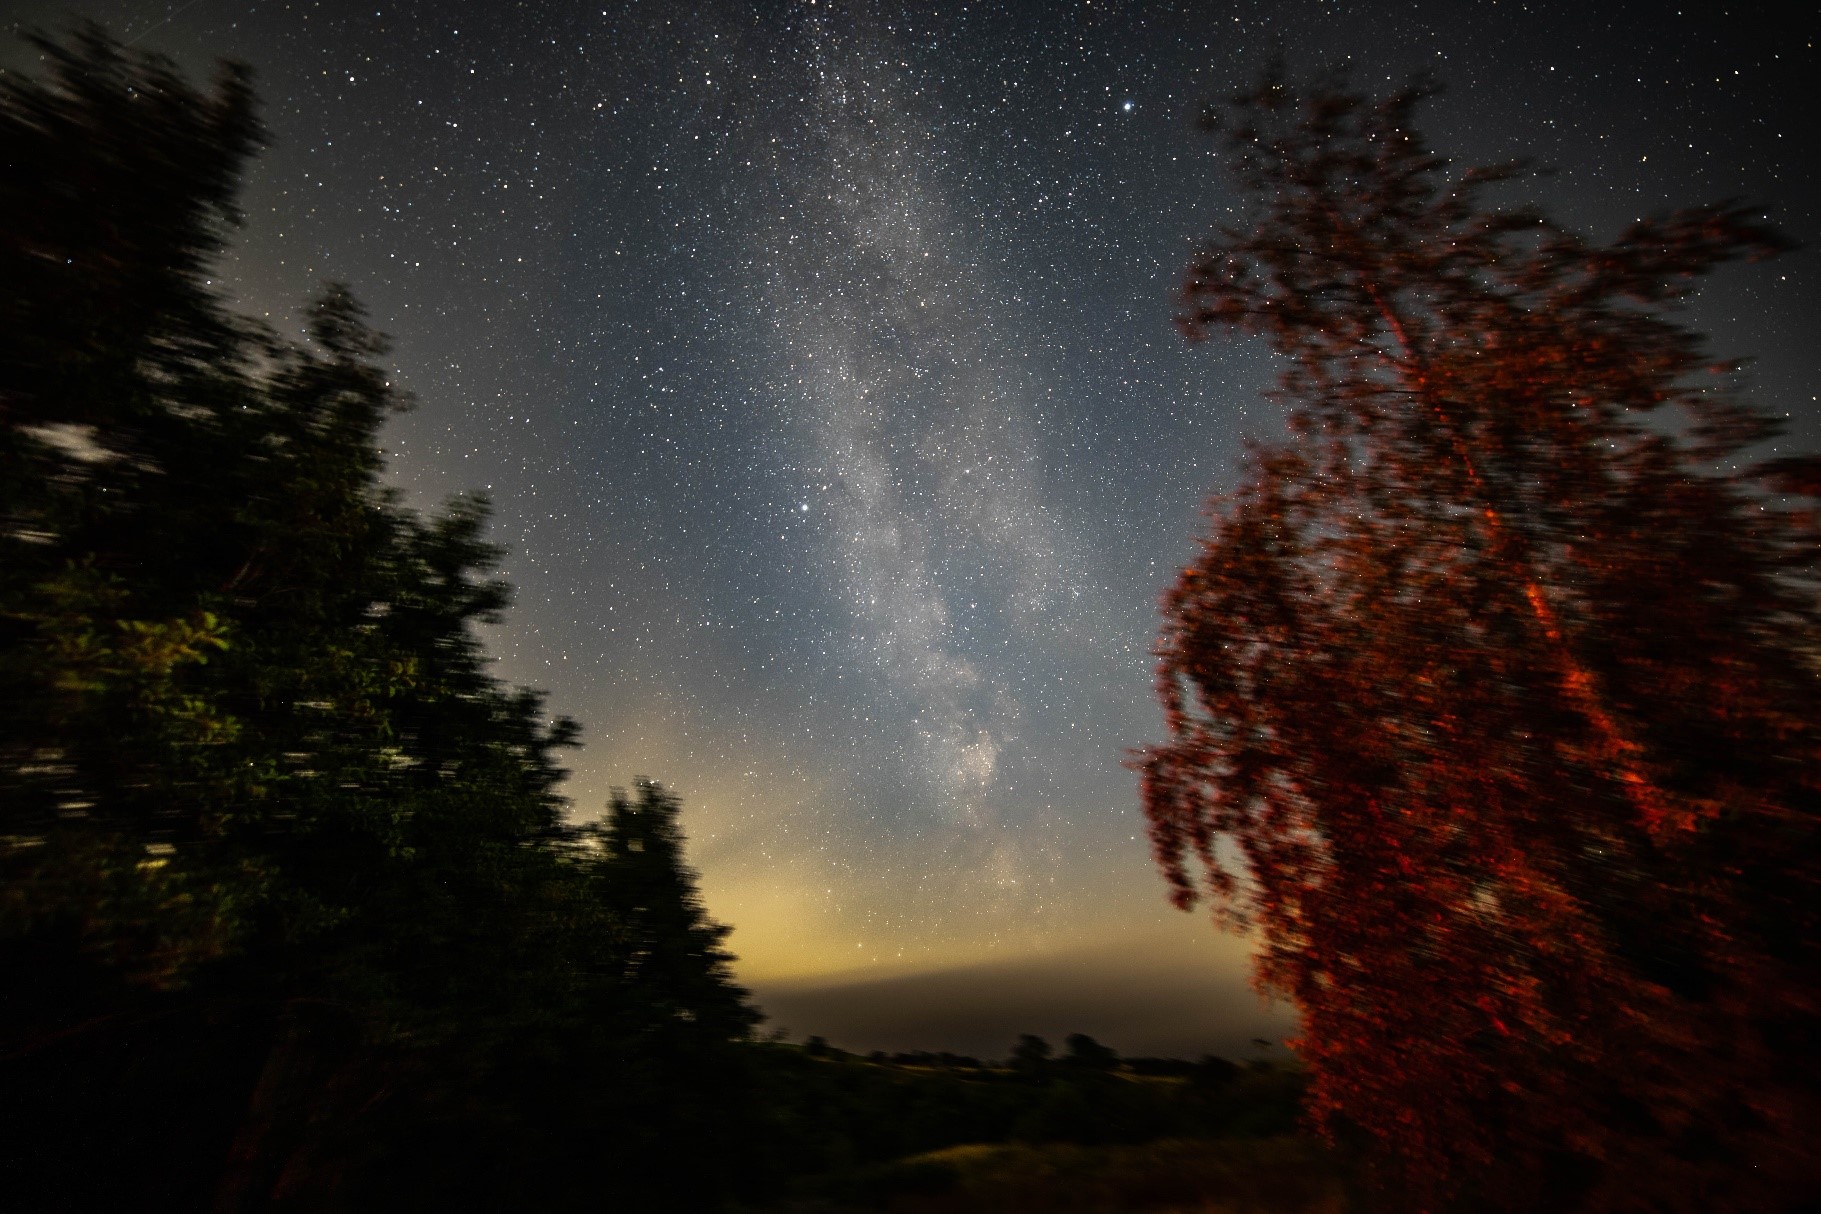 Image of night sky with the milky way and stars with the silhouette of trees